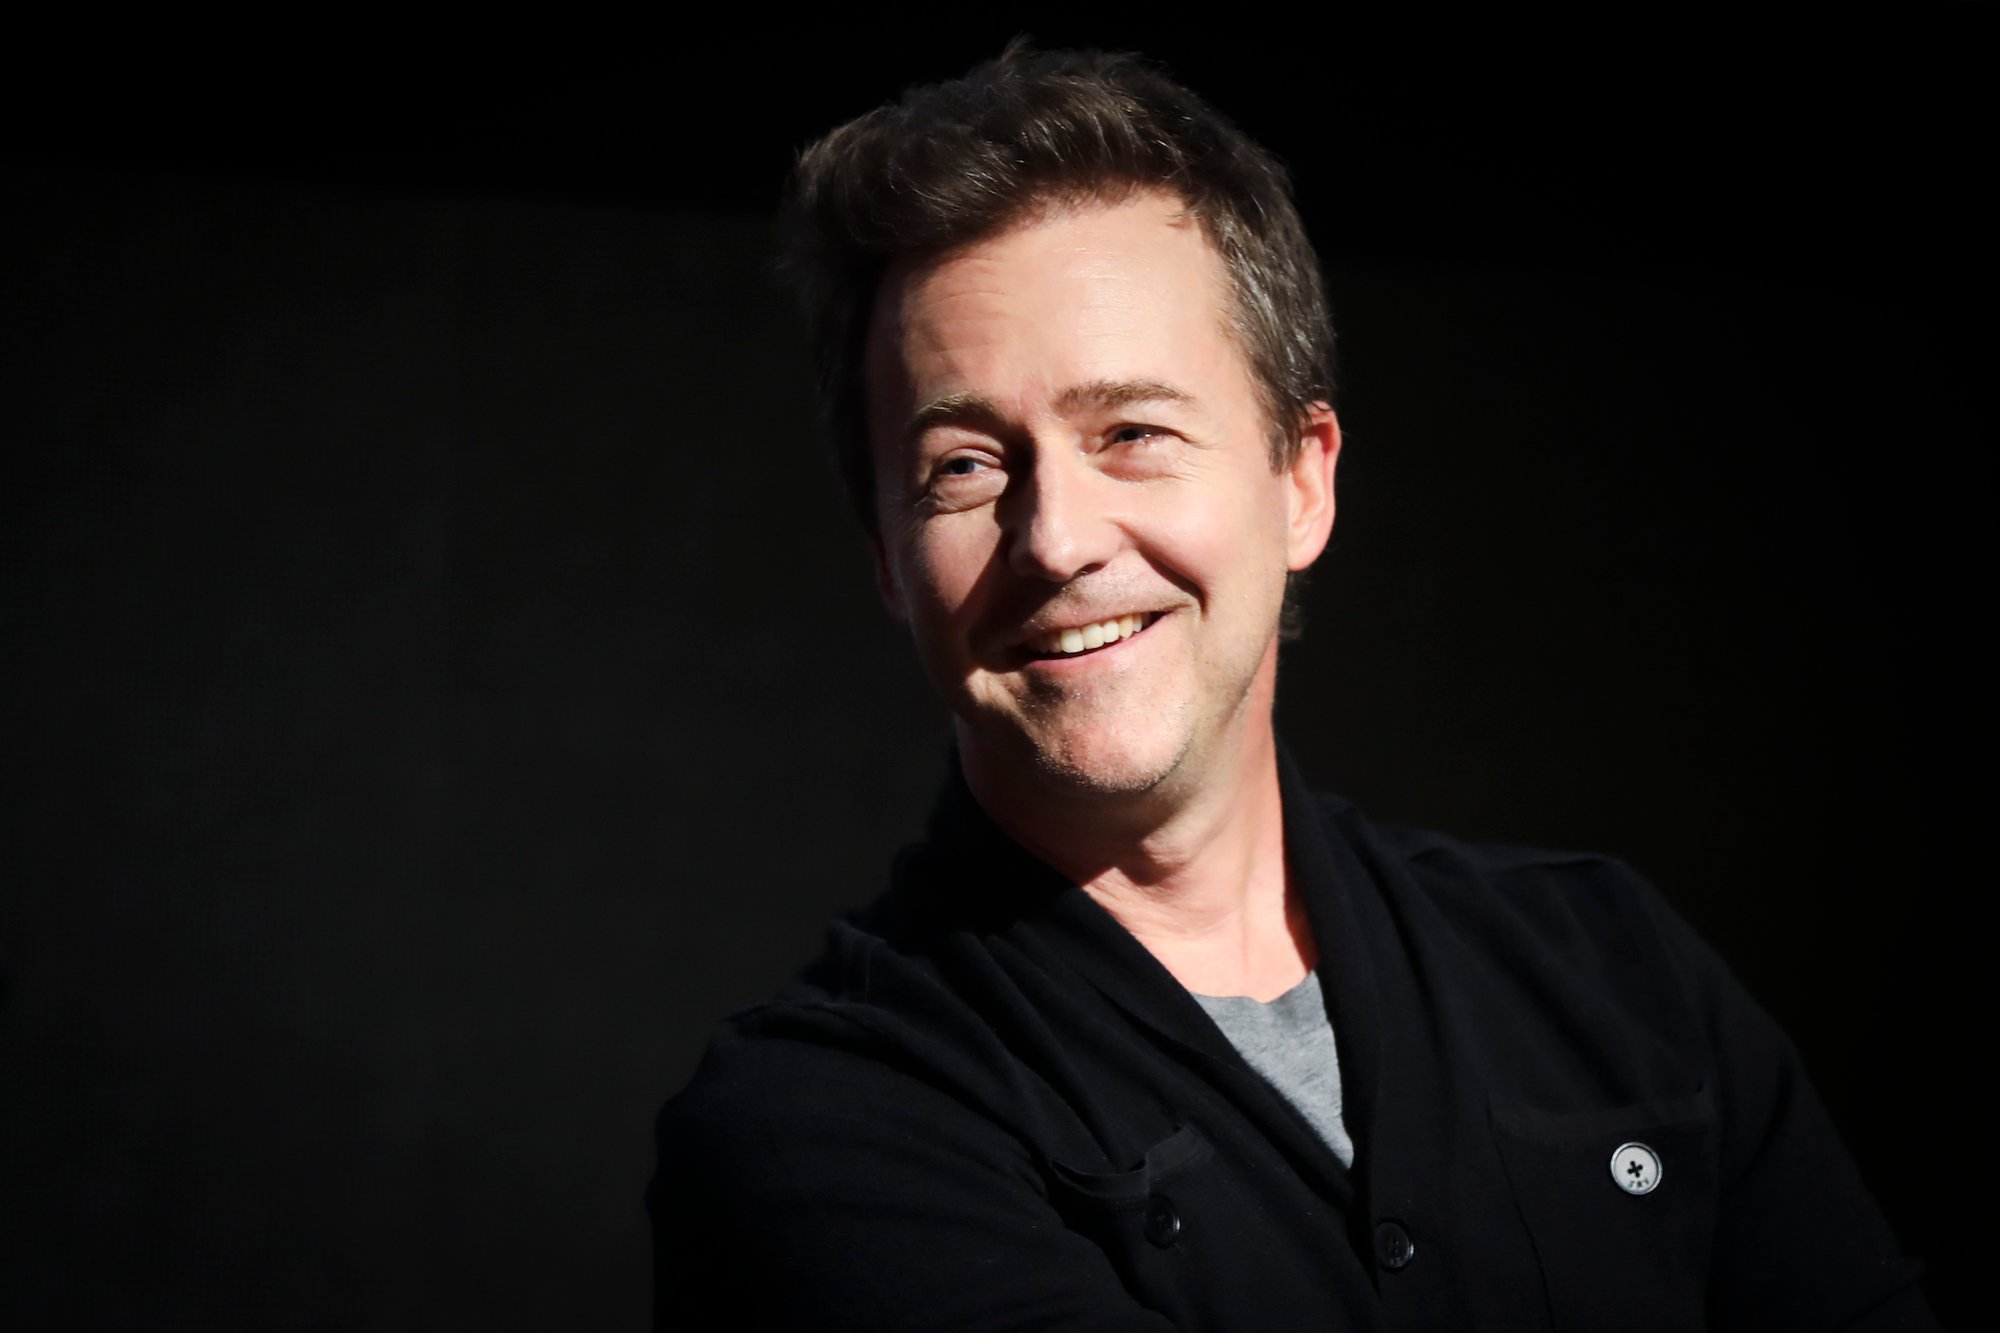 Edward Norton laughing, looking off camera, in front of a black background